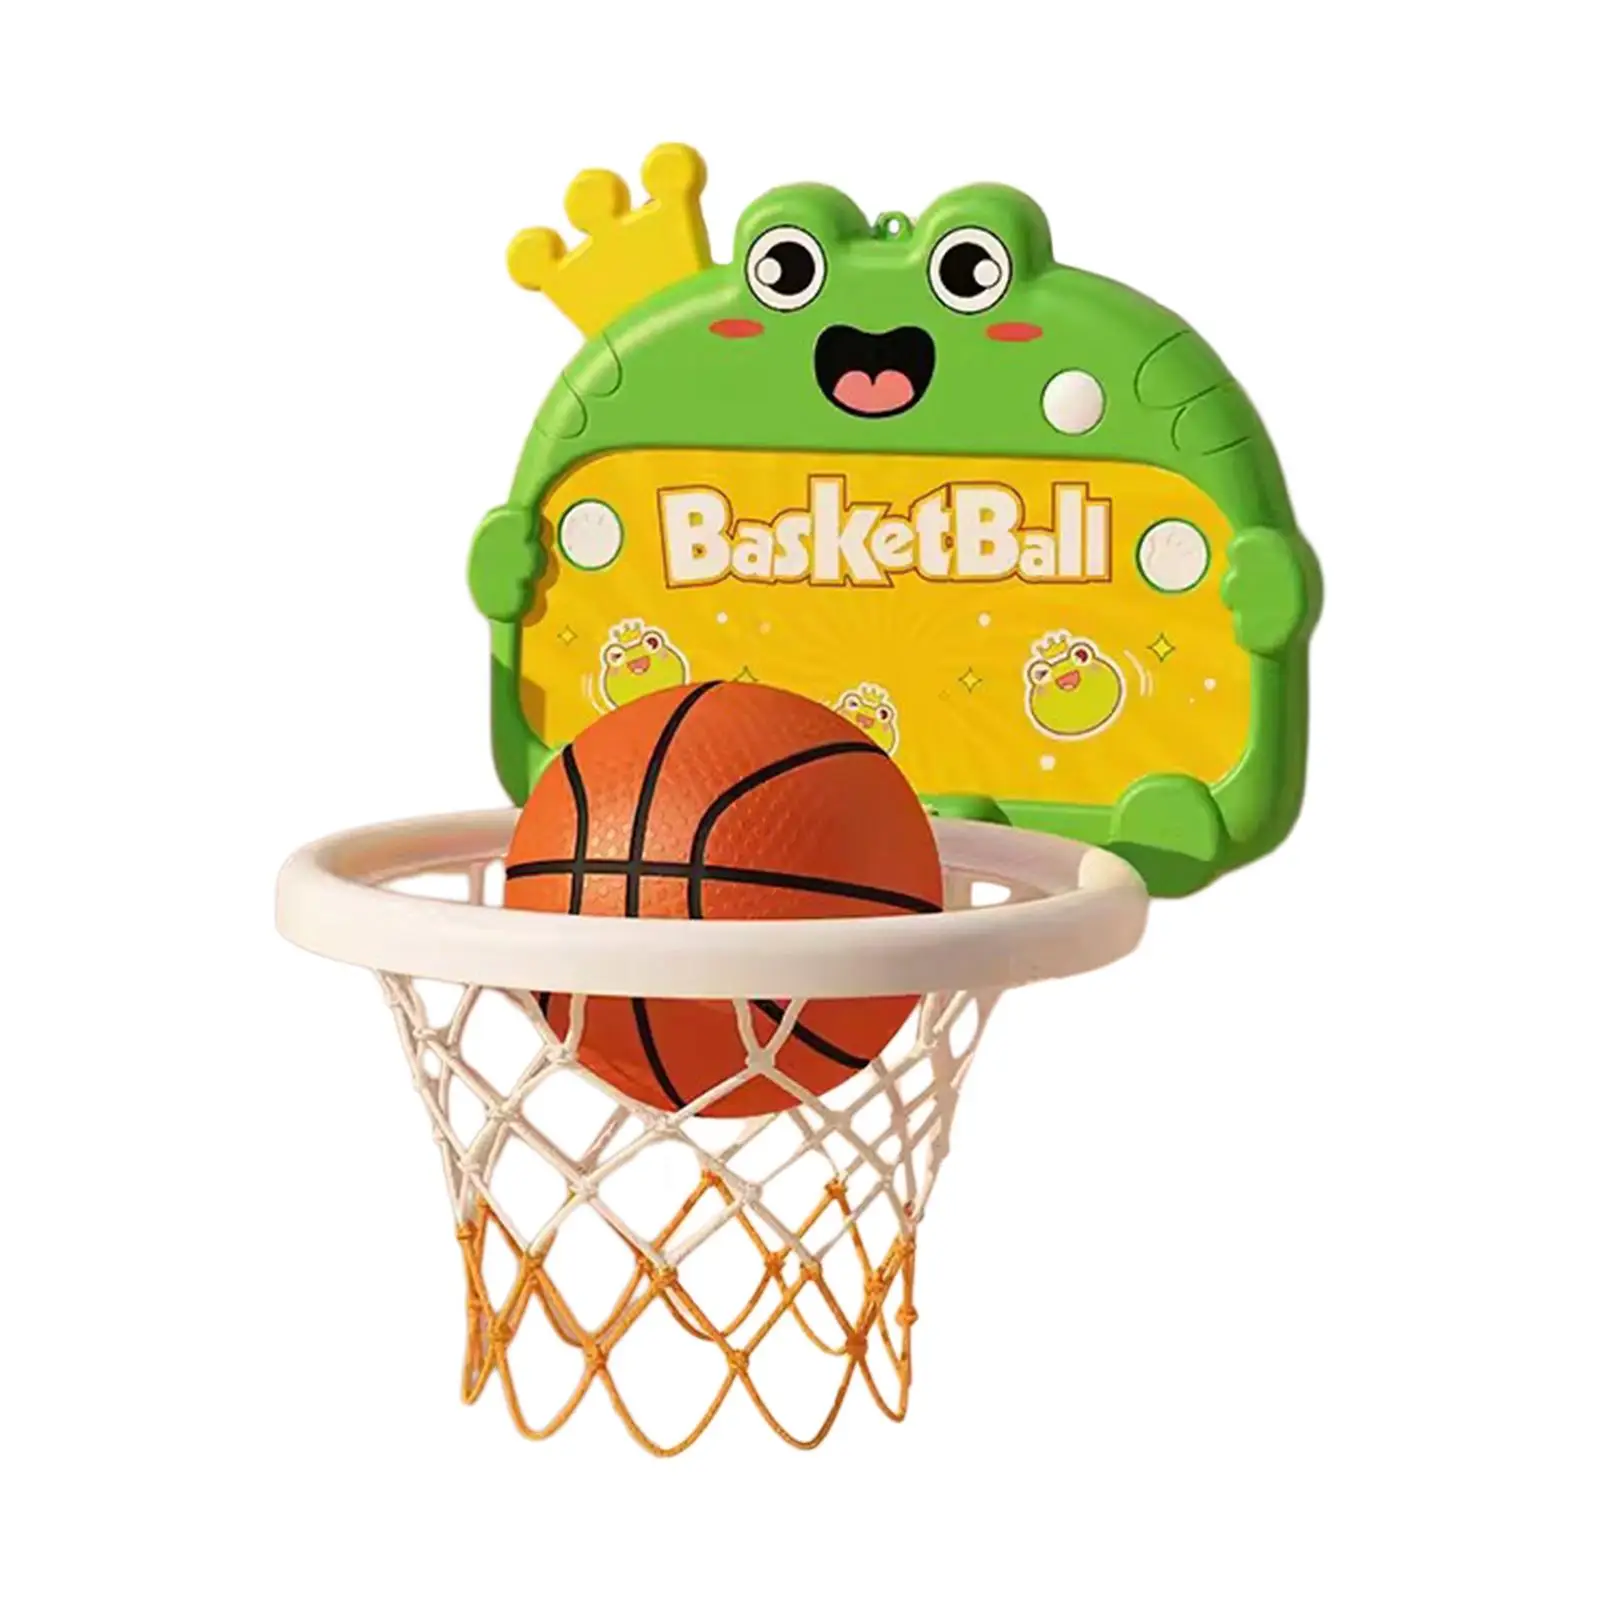 Mini Basketball Hoop Set Activity Centers Holiday Gifts Practice Hand Eye Coordination with Basketball for Wall Living Room Door